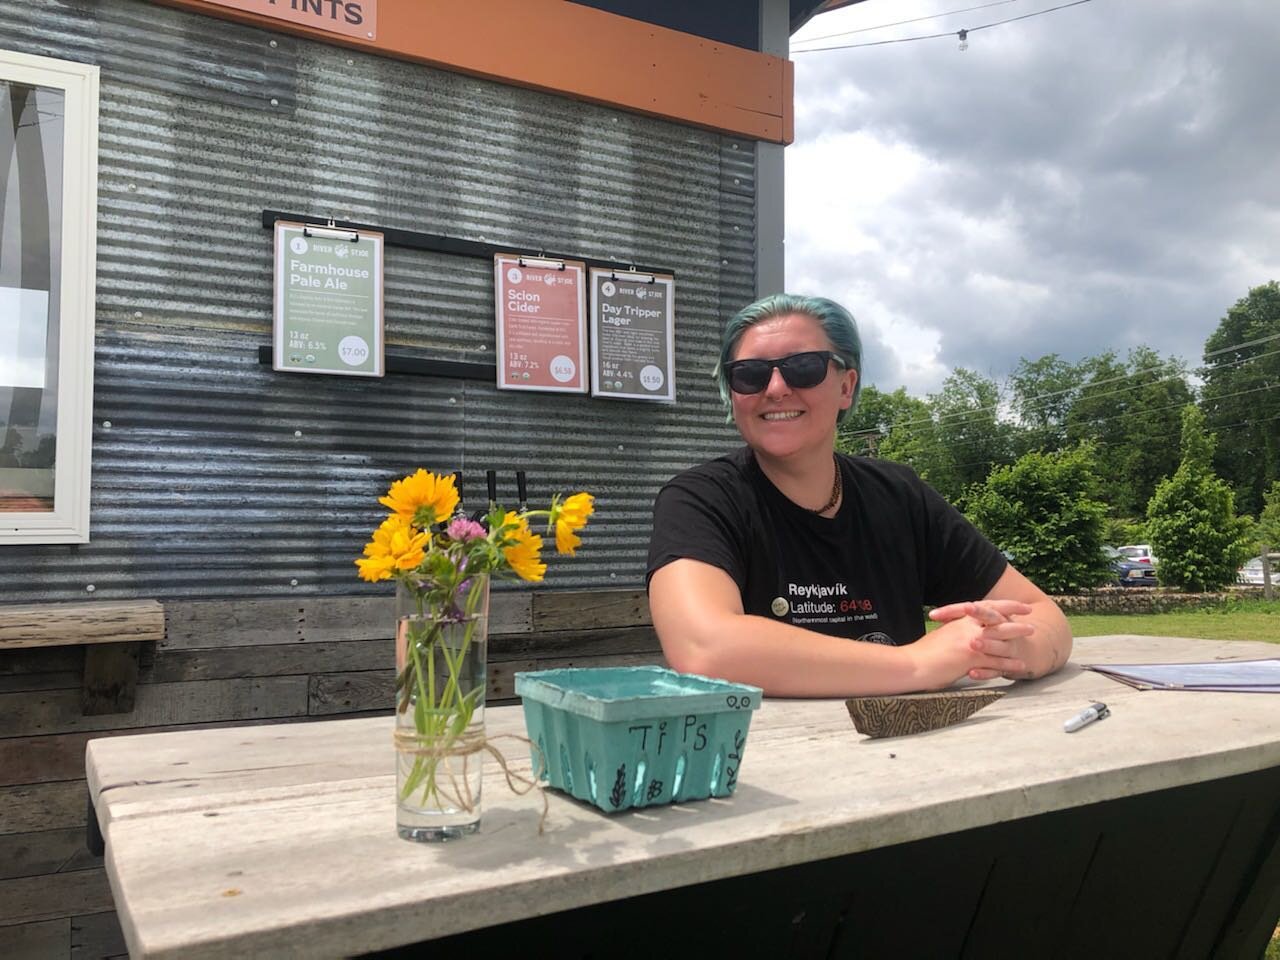 One of the newest additions to River Saint Joe is &quot;Plants and Pints&quot;, our outdoor beer bar and produce stand. It's open from 1-7 today.  Get# a farm beer right in the field or stop by for Flatwater Farms&rsquo; fresh organic produce.  #orga